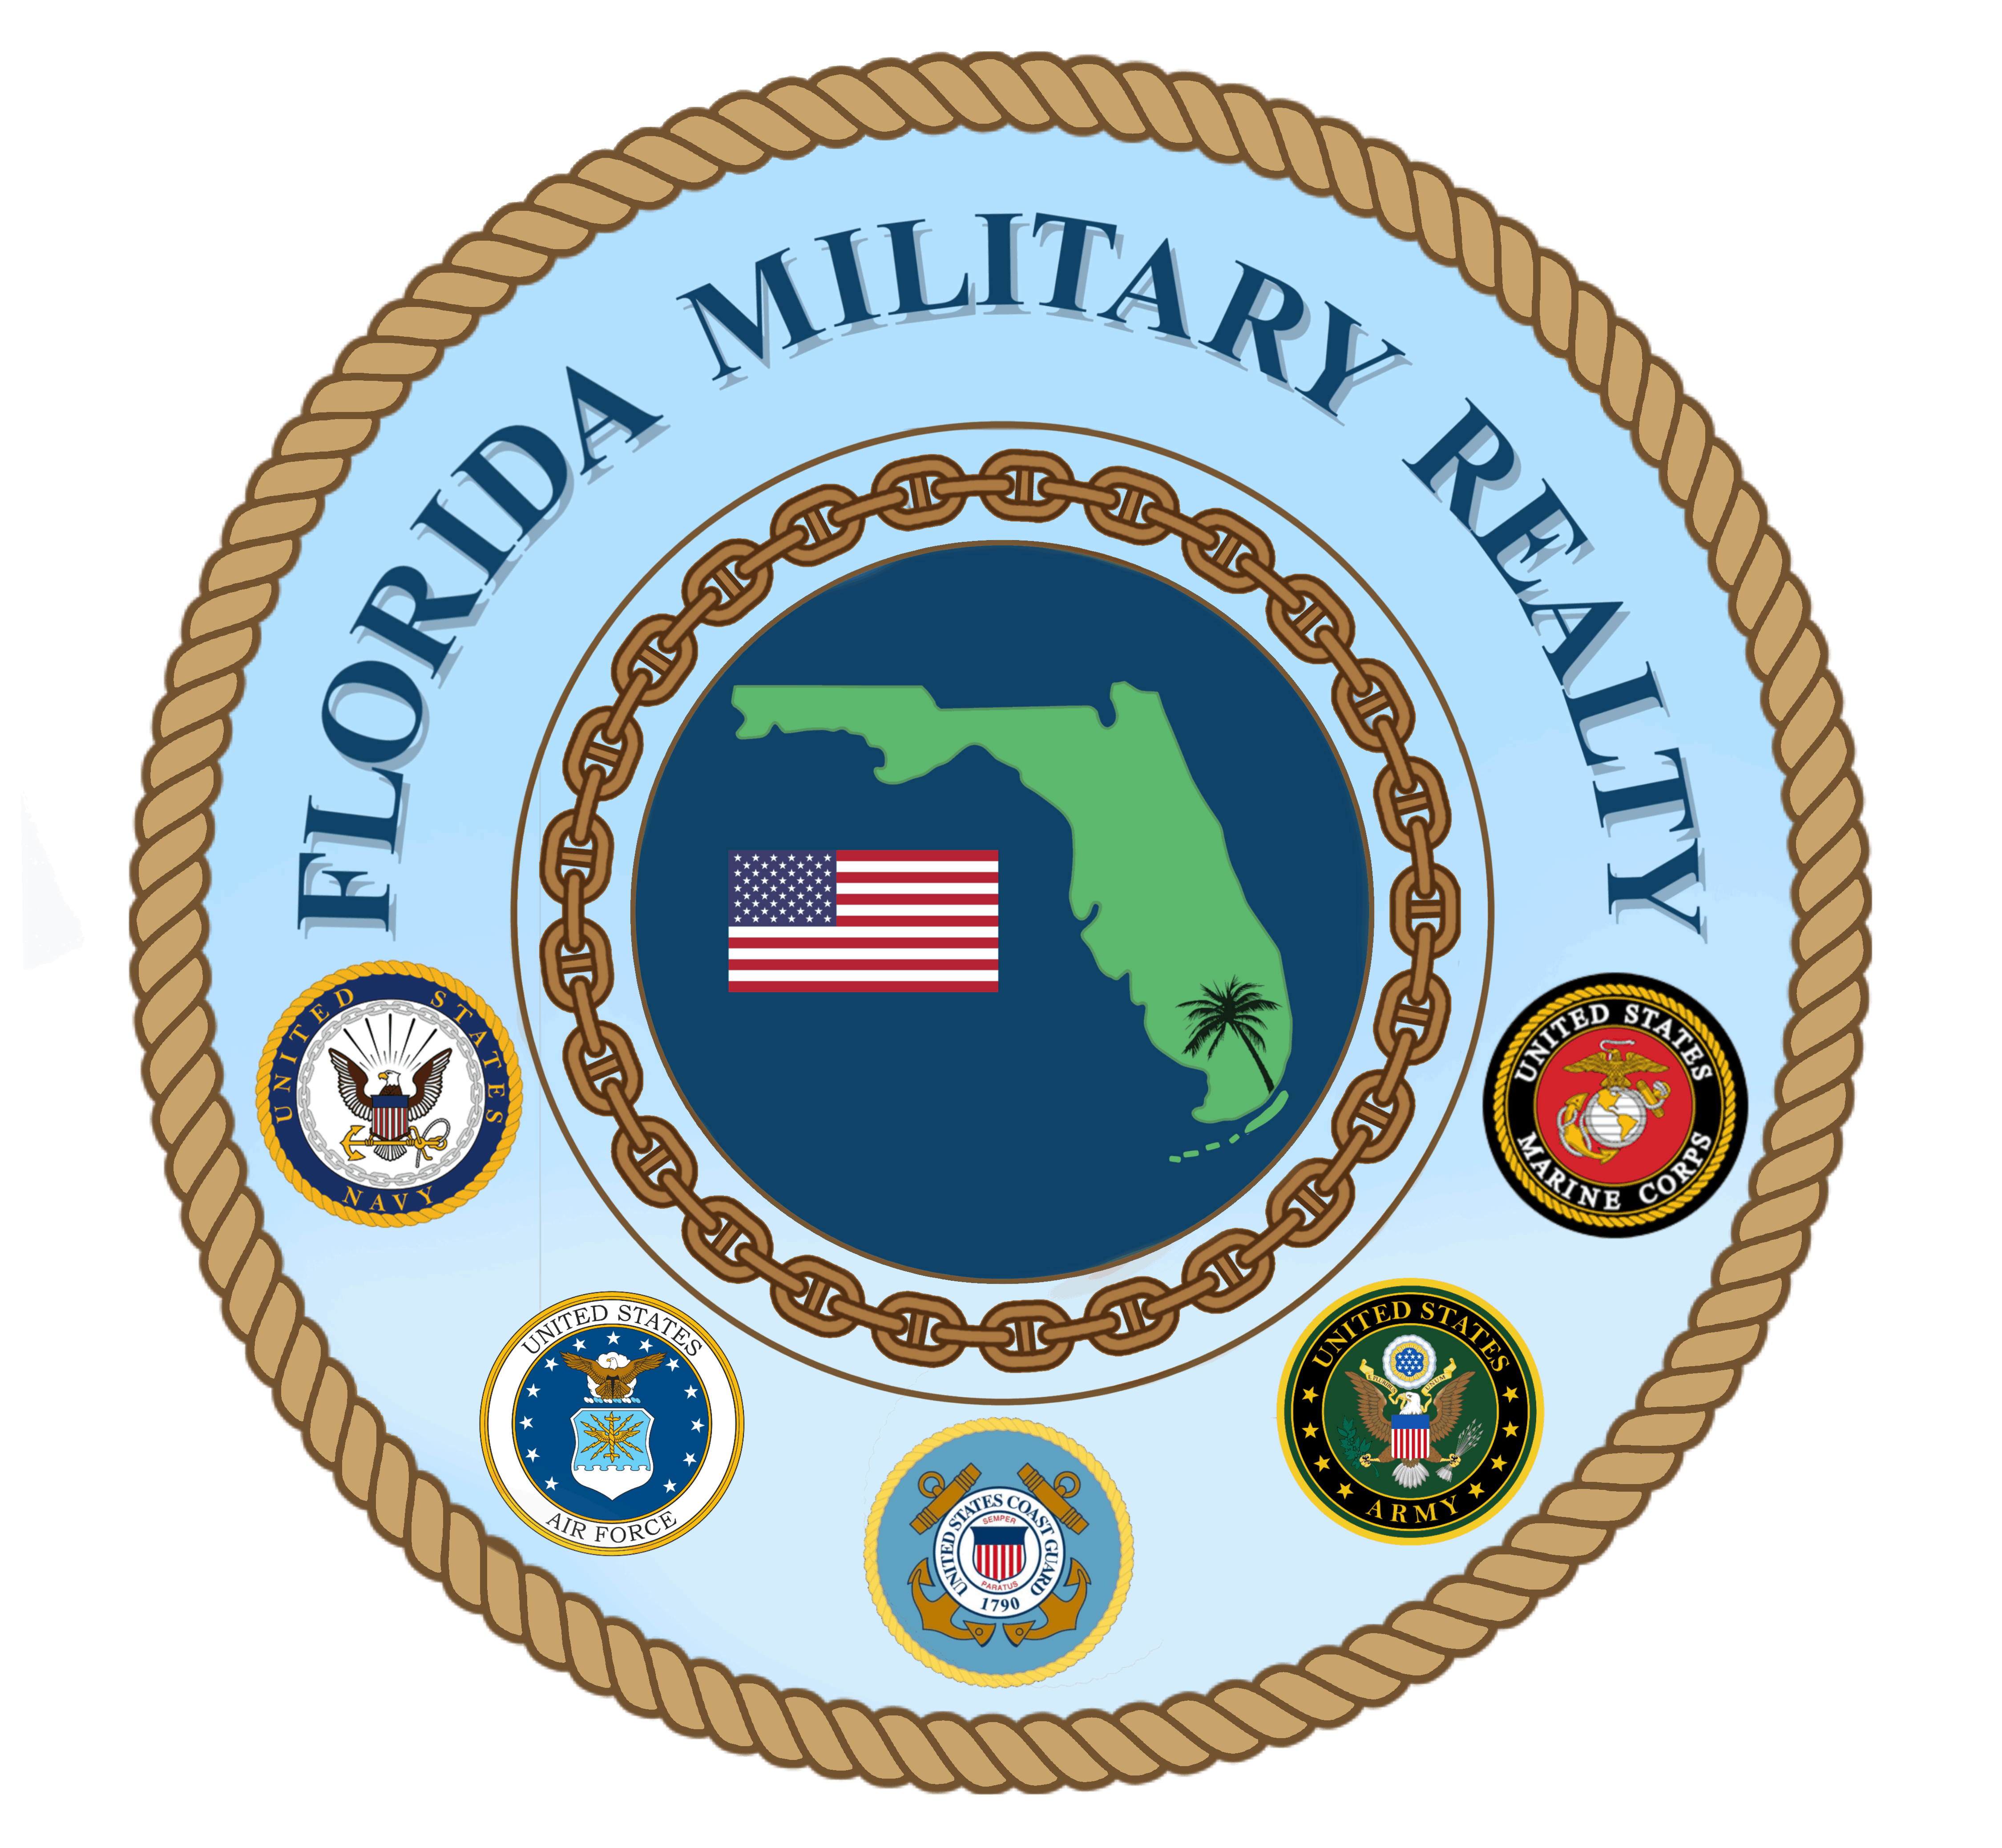 http://floridamilitaryrealty.com/wp-content/uploads/2020/10/cropped-FMR-Logo-2-1.png